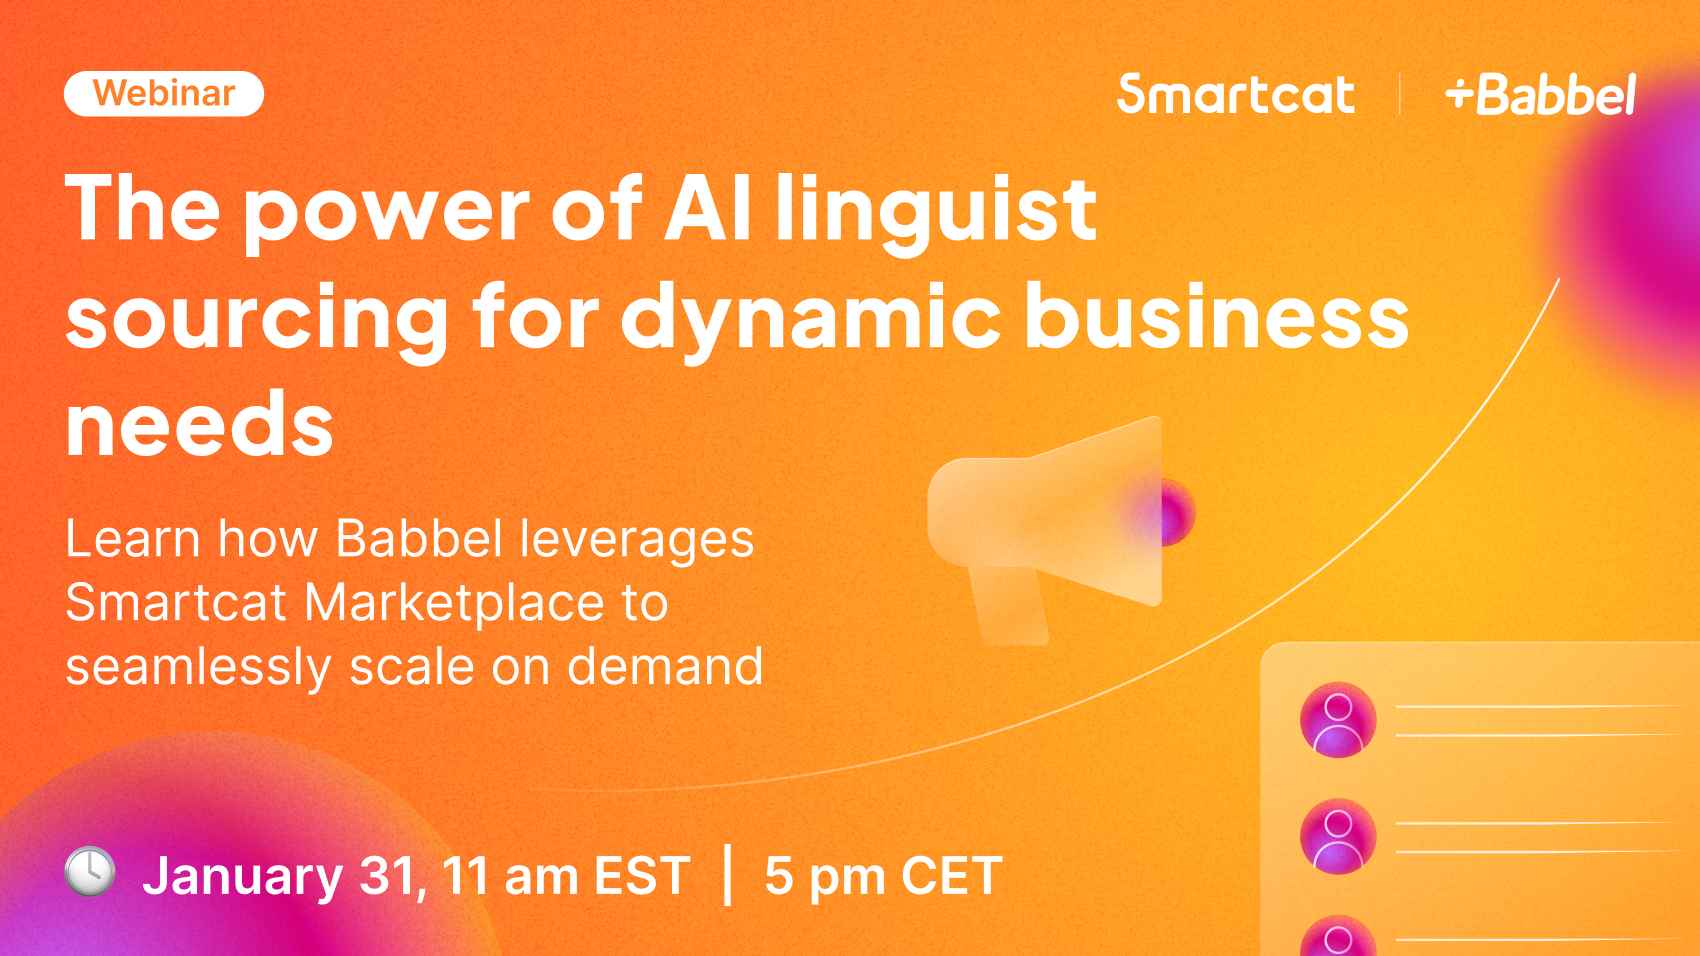 The power of AI linguist sourcing for dynamic business needs